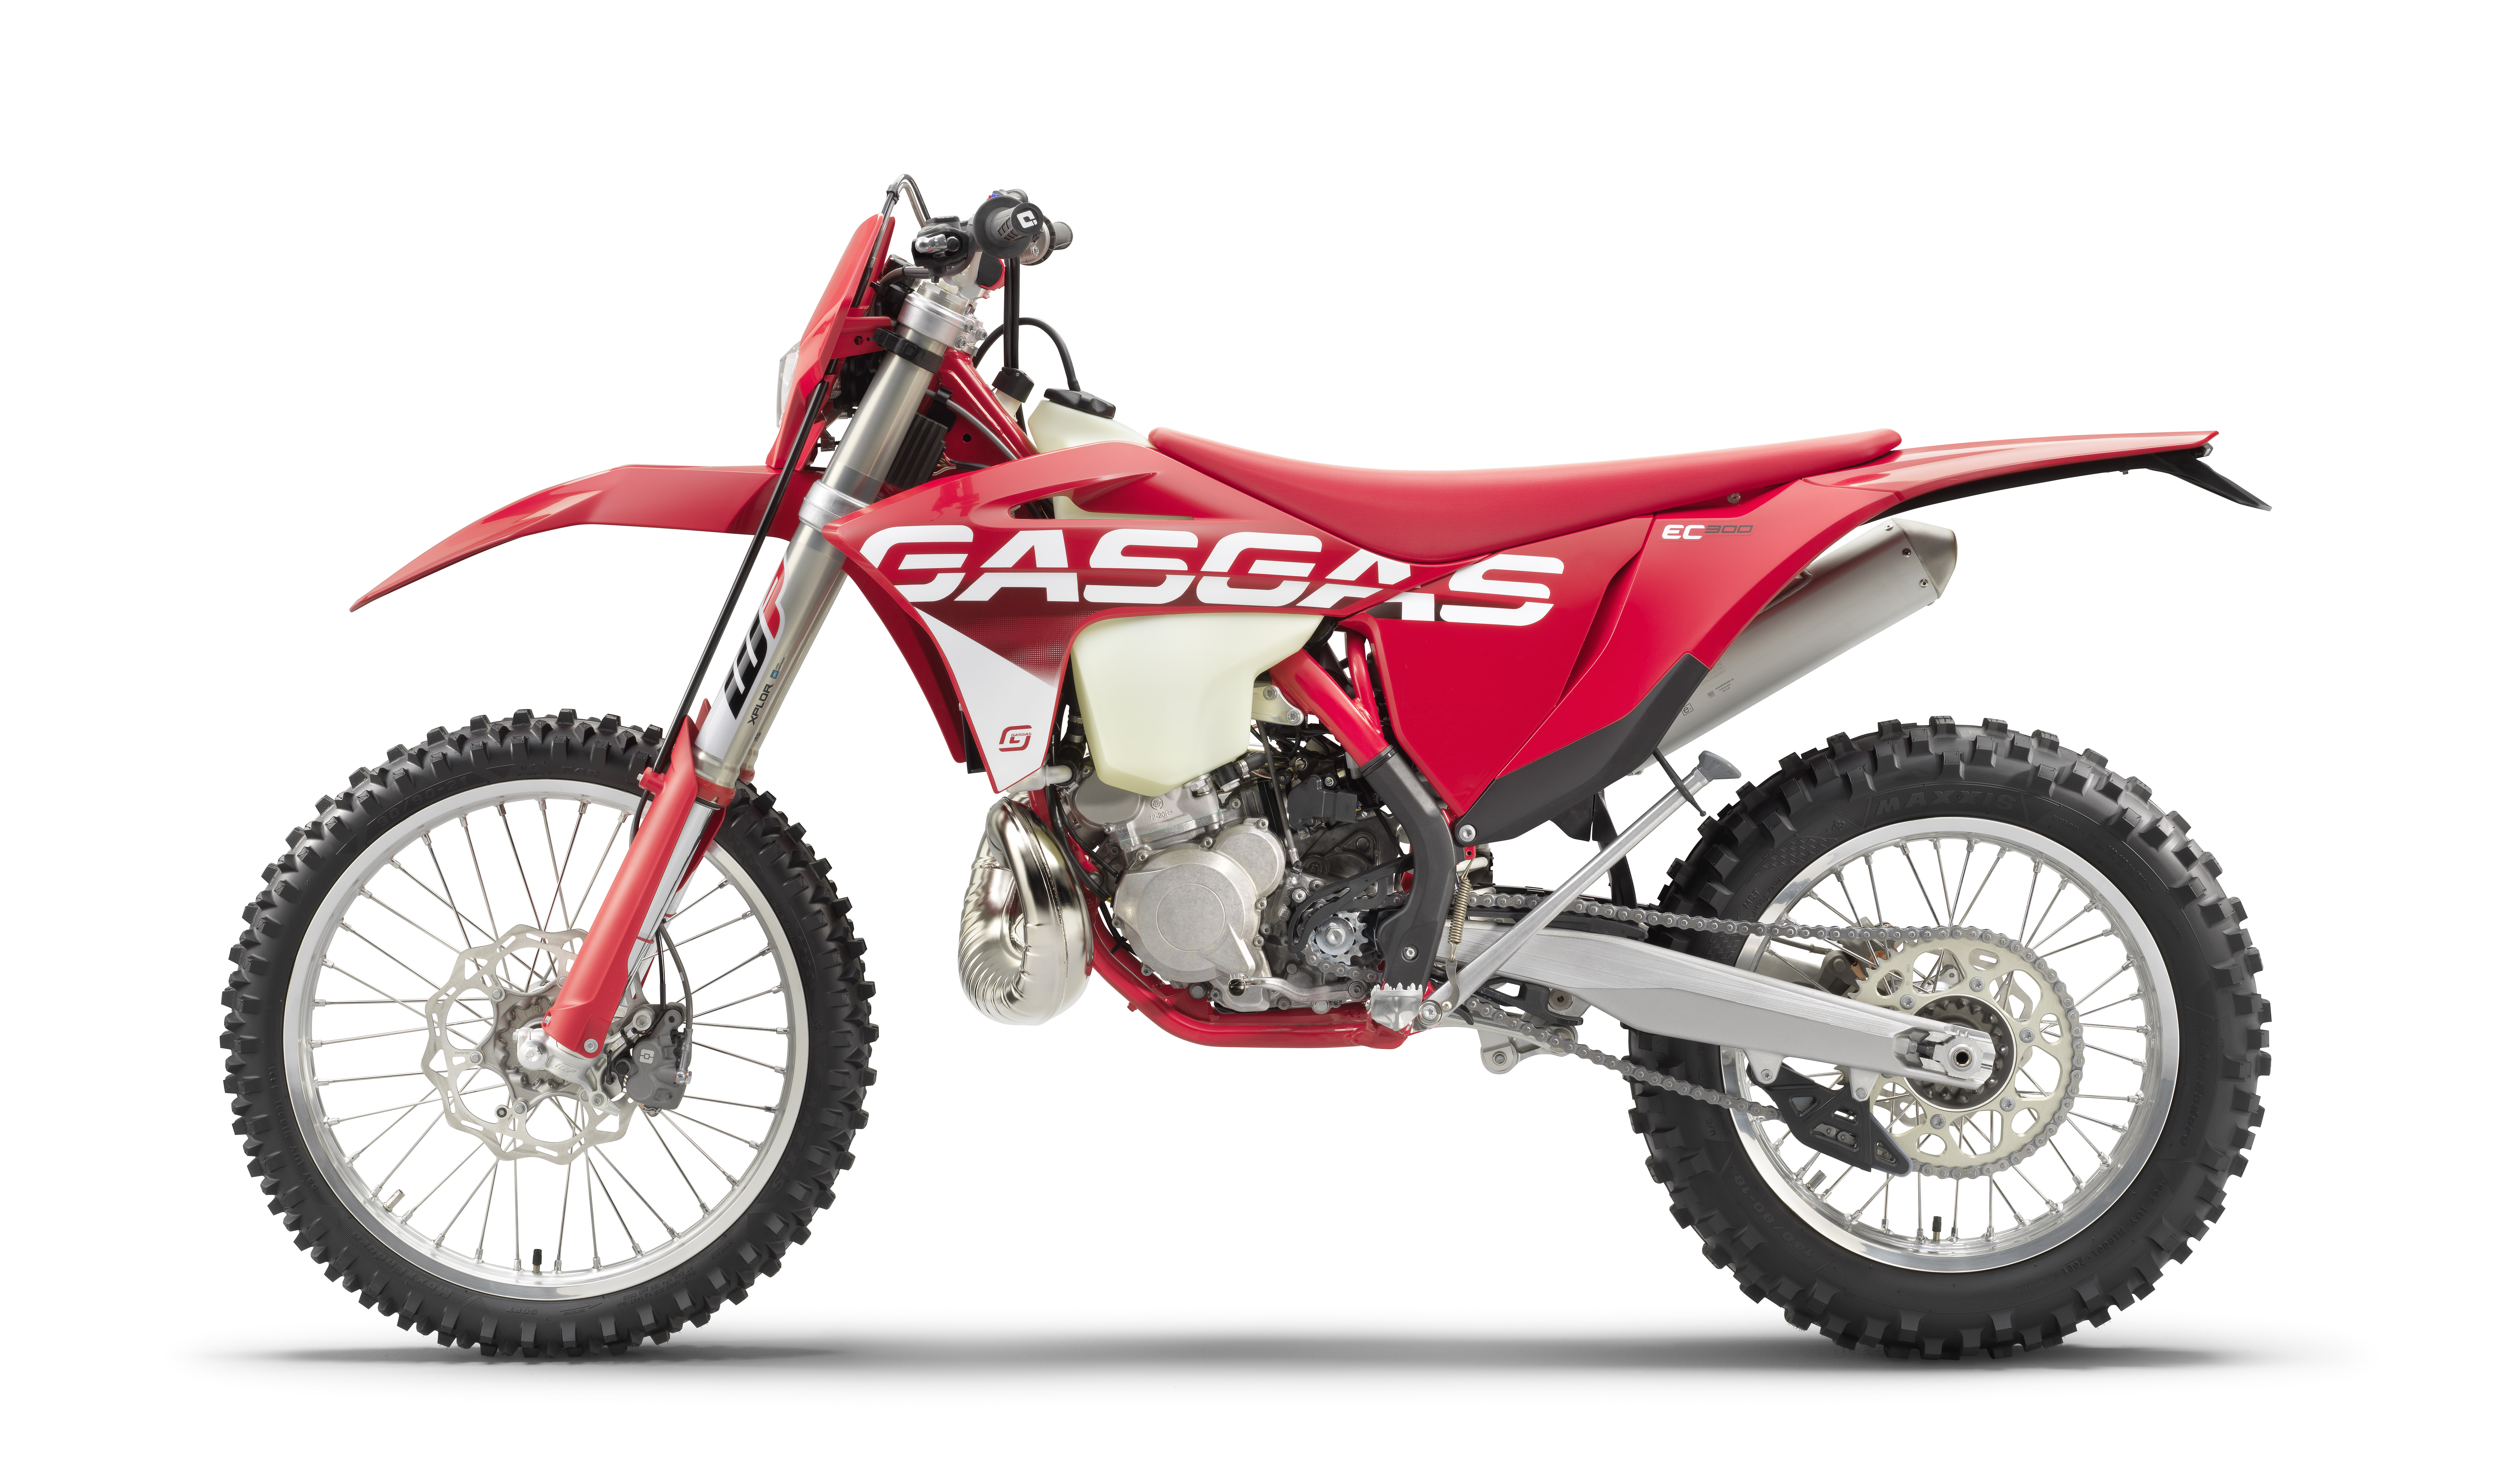 GasGas motorcycles now in Malaysia, enduro and motocross, range from RM39,500 to RM48,000 1493400